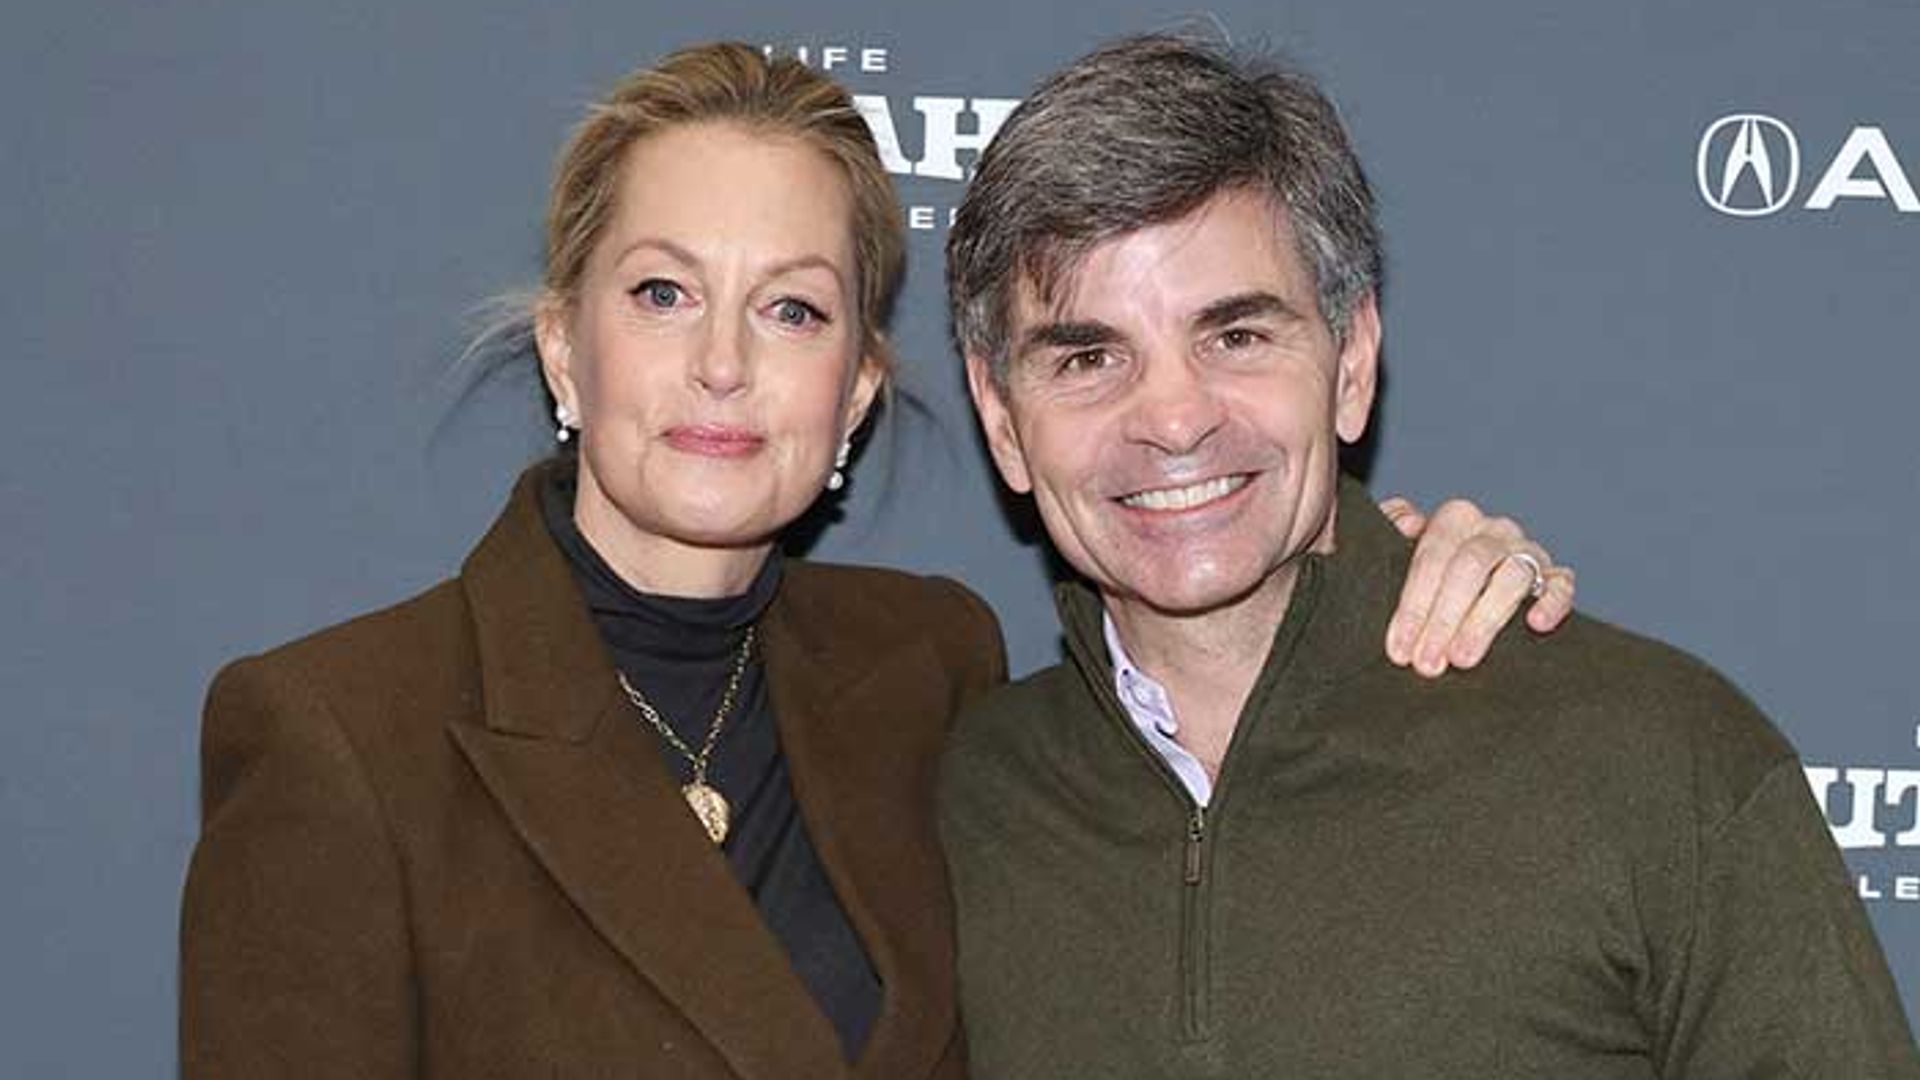 GMA's George Stephanopoulos' daughter is as tall as him in grown-up photo that sparks reaction